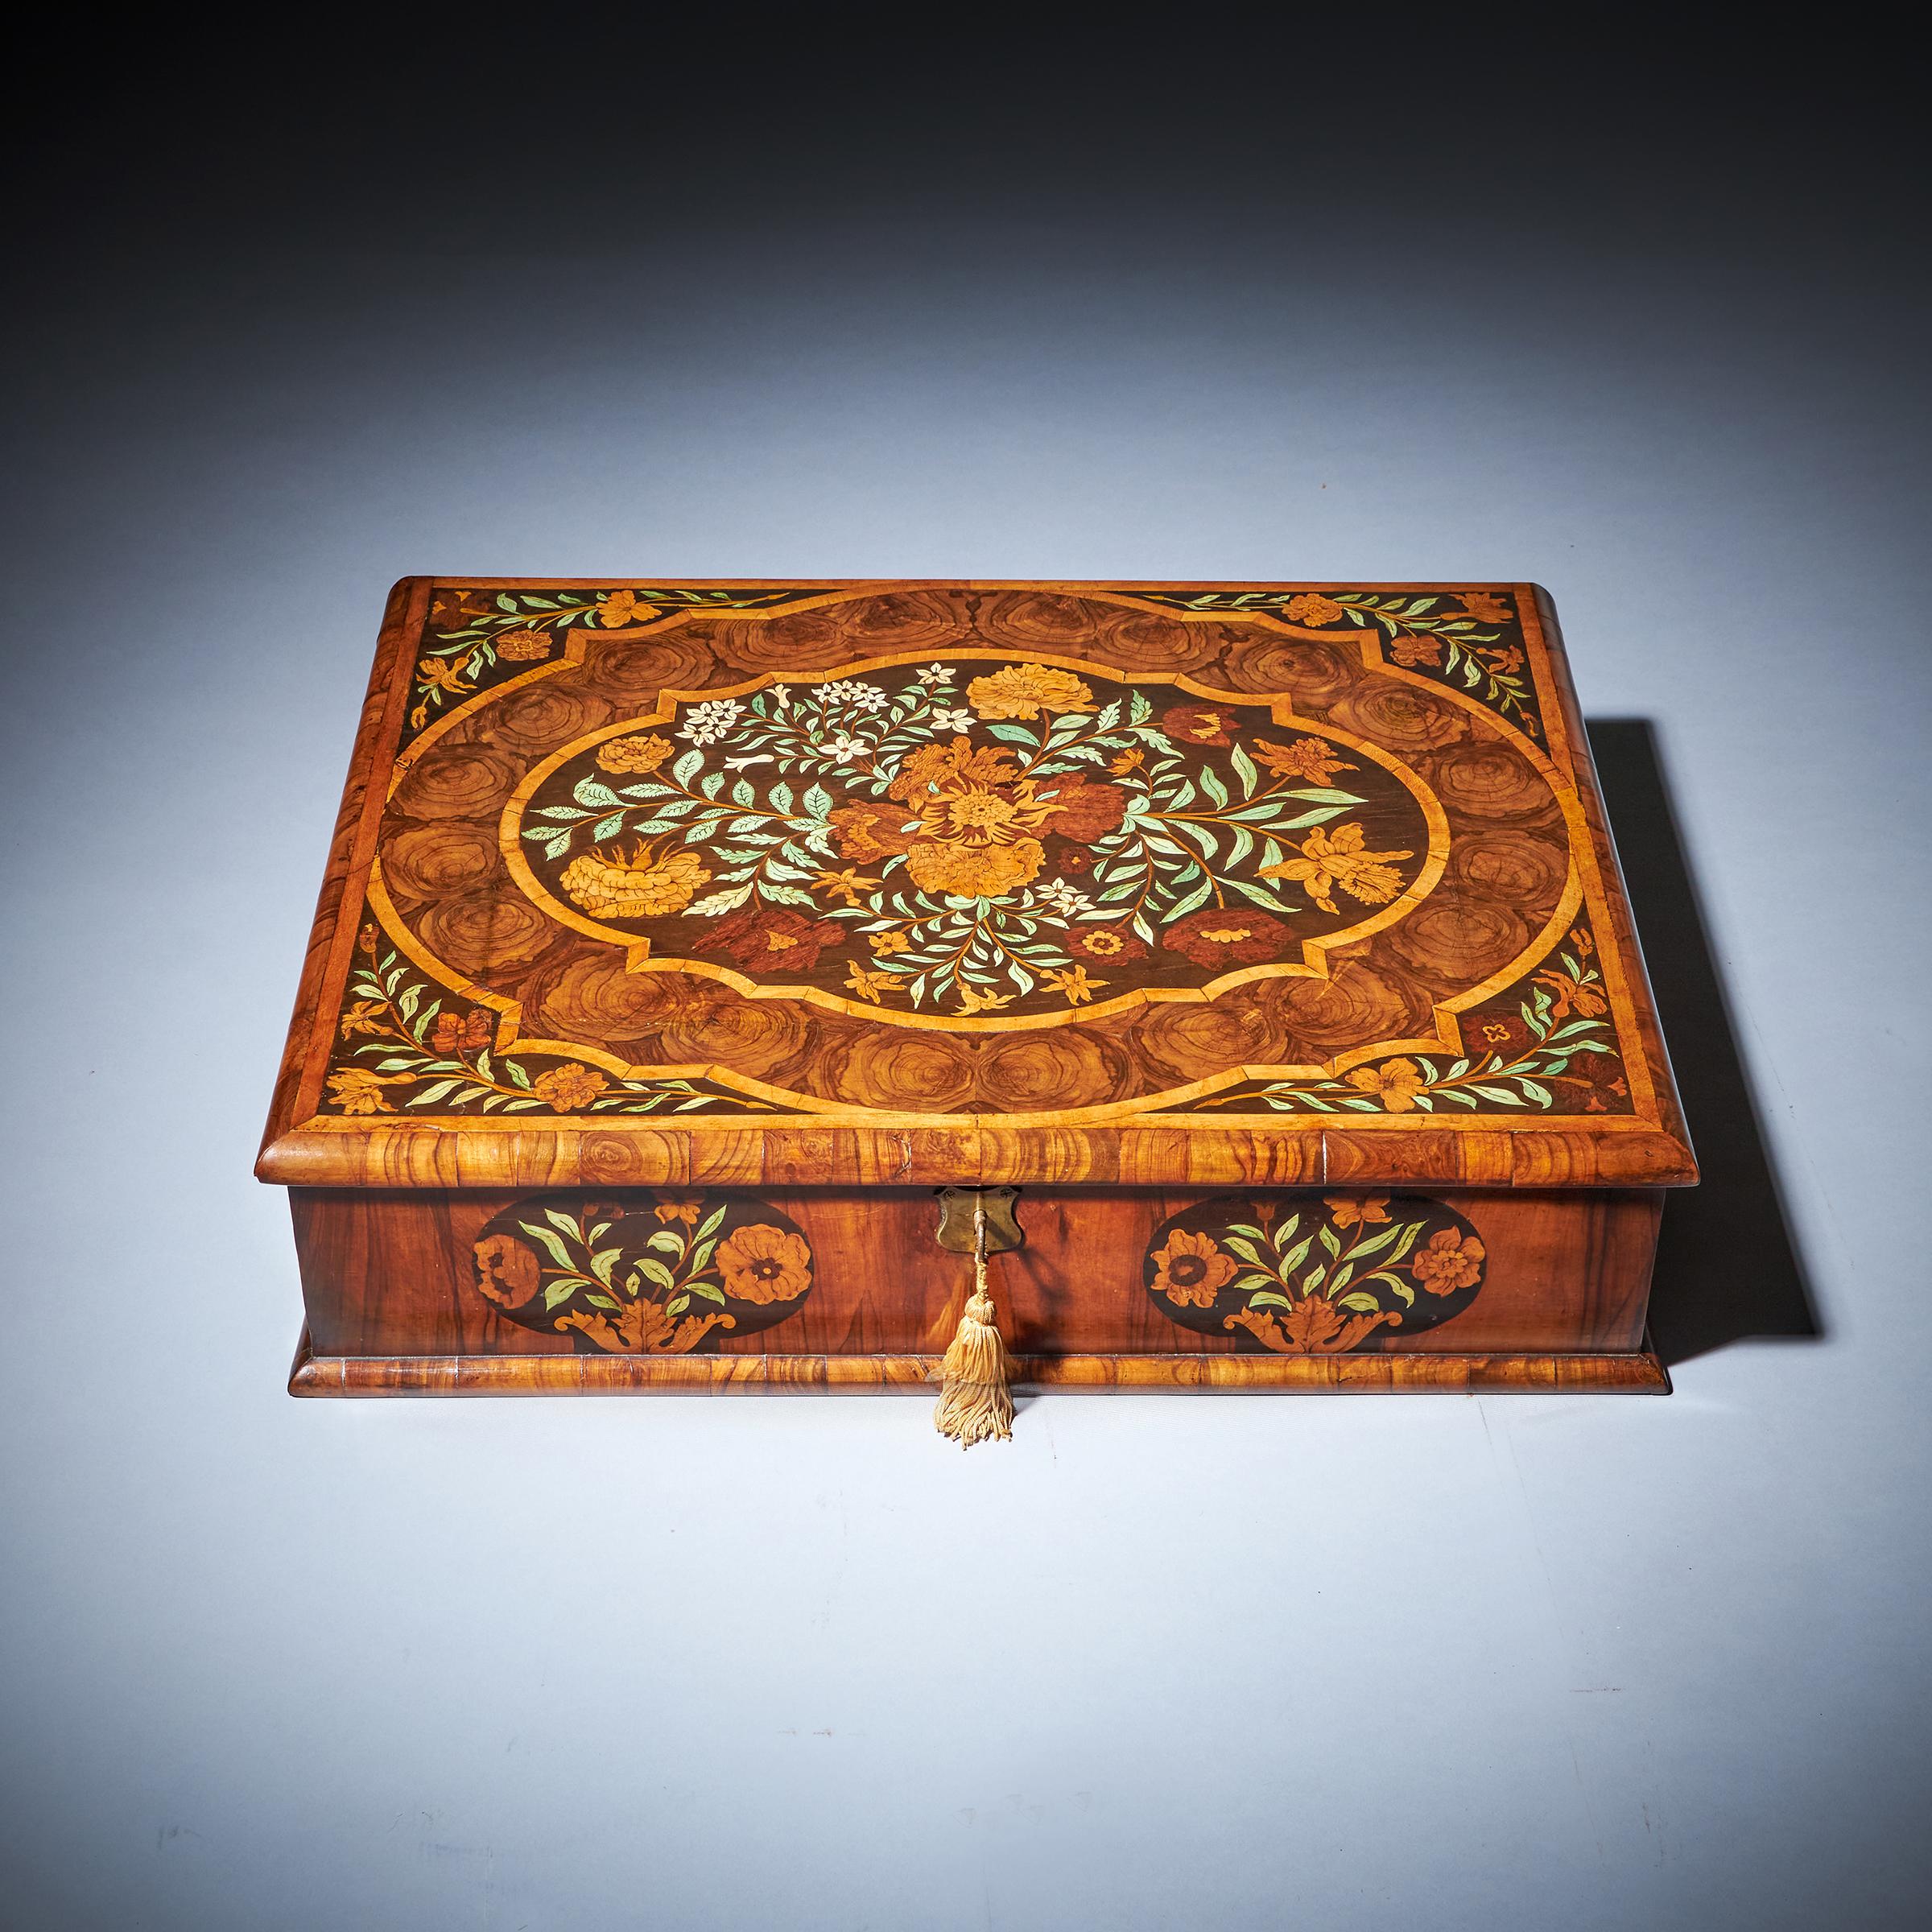 A fine and rare 17th century William and Mary olive oyster marquetry lace box circa 1670-1690-2